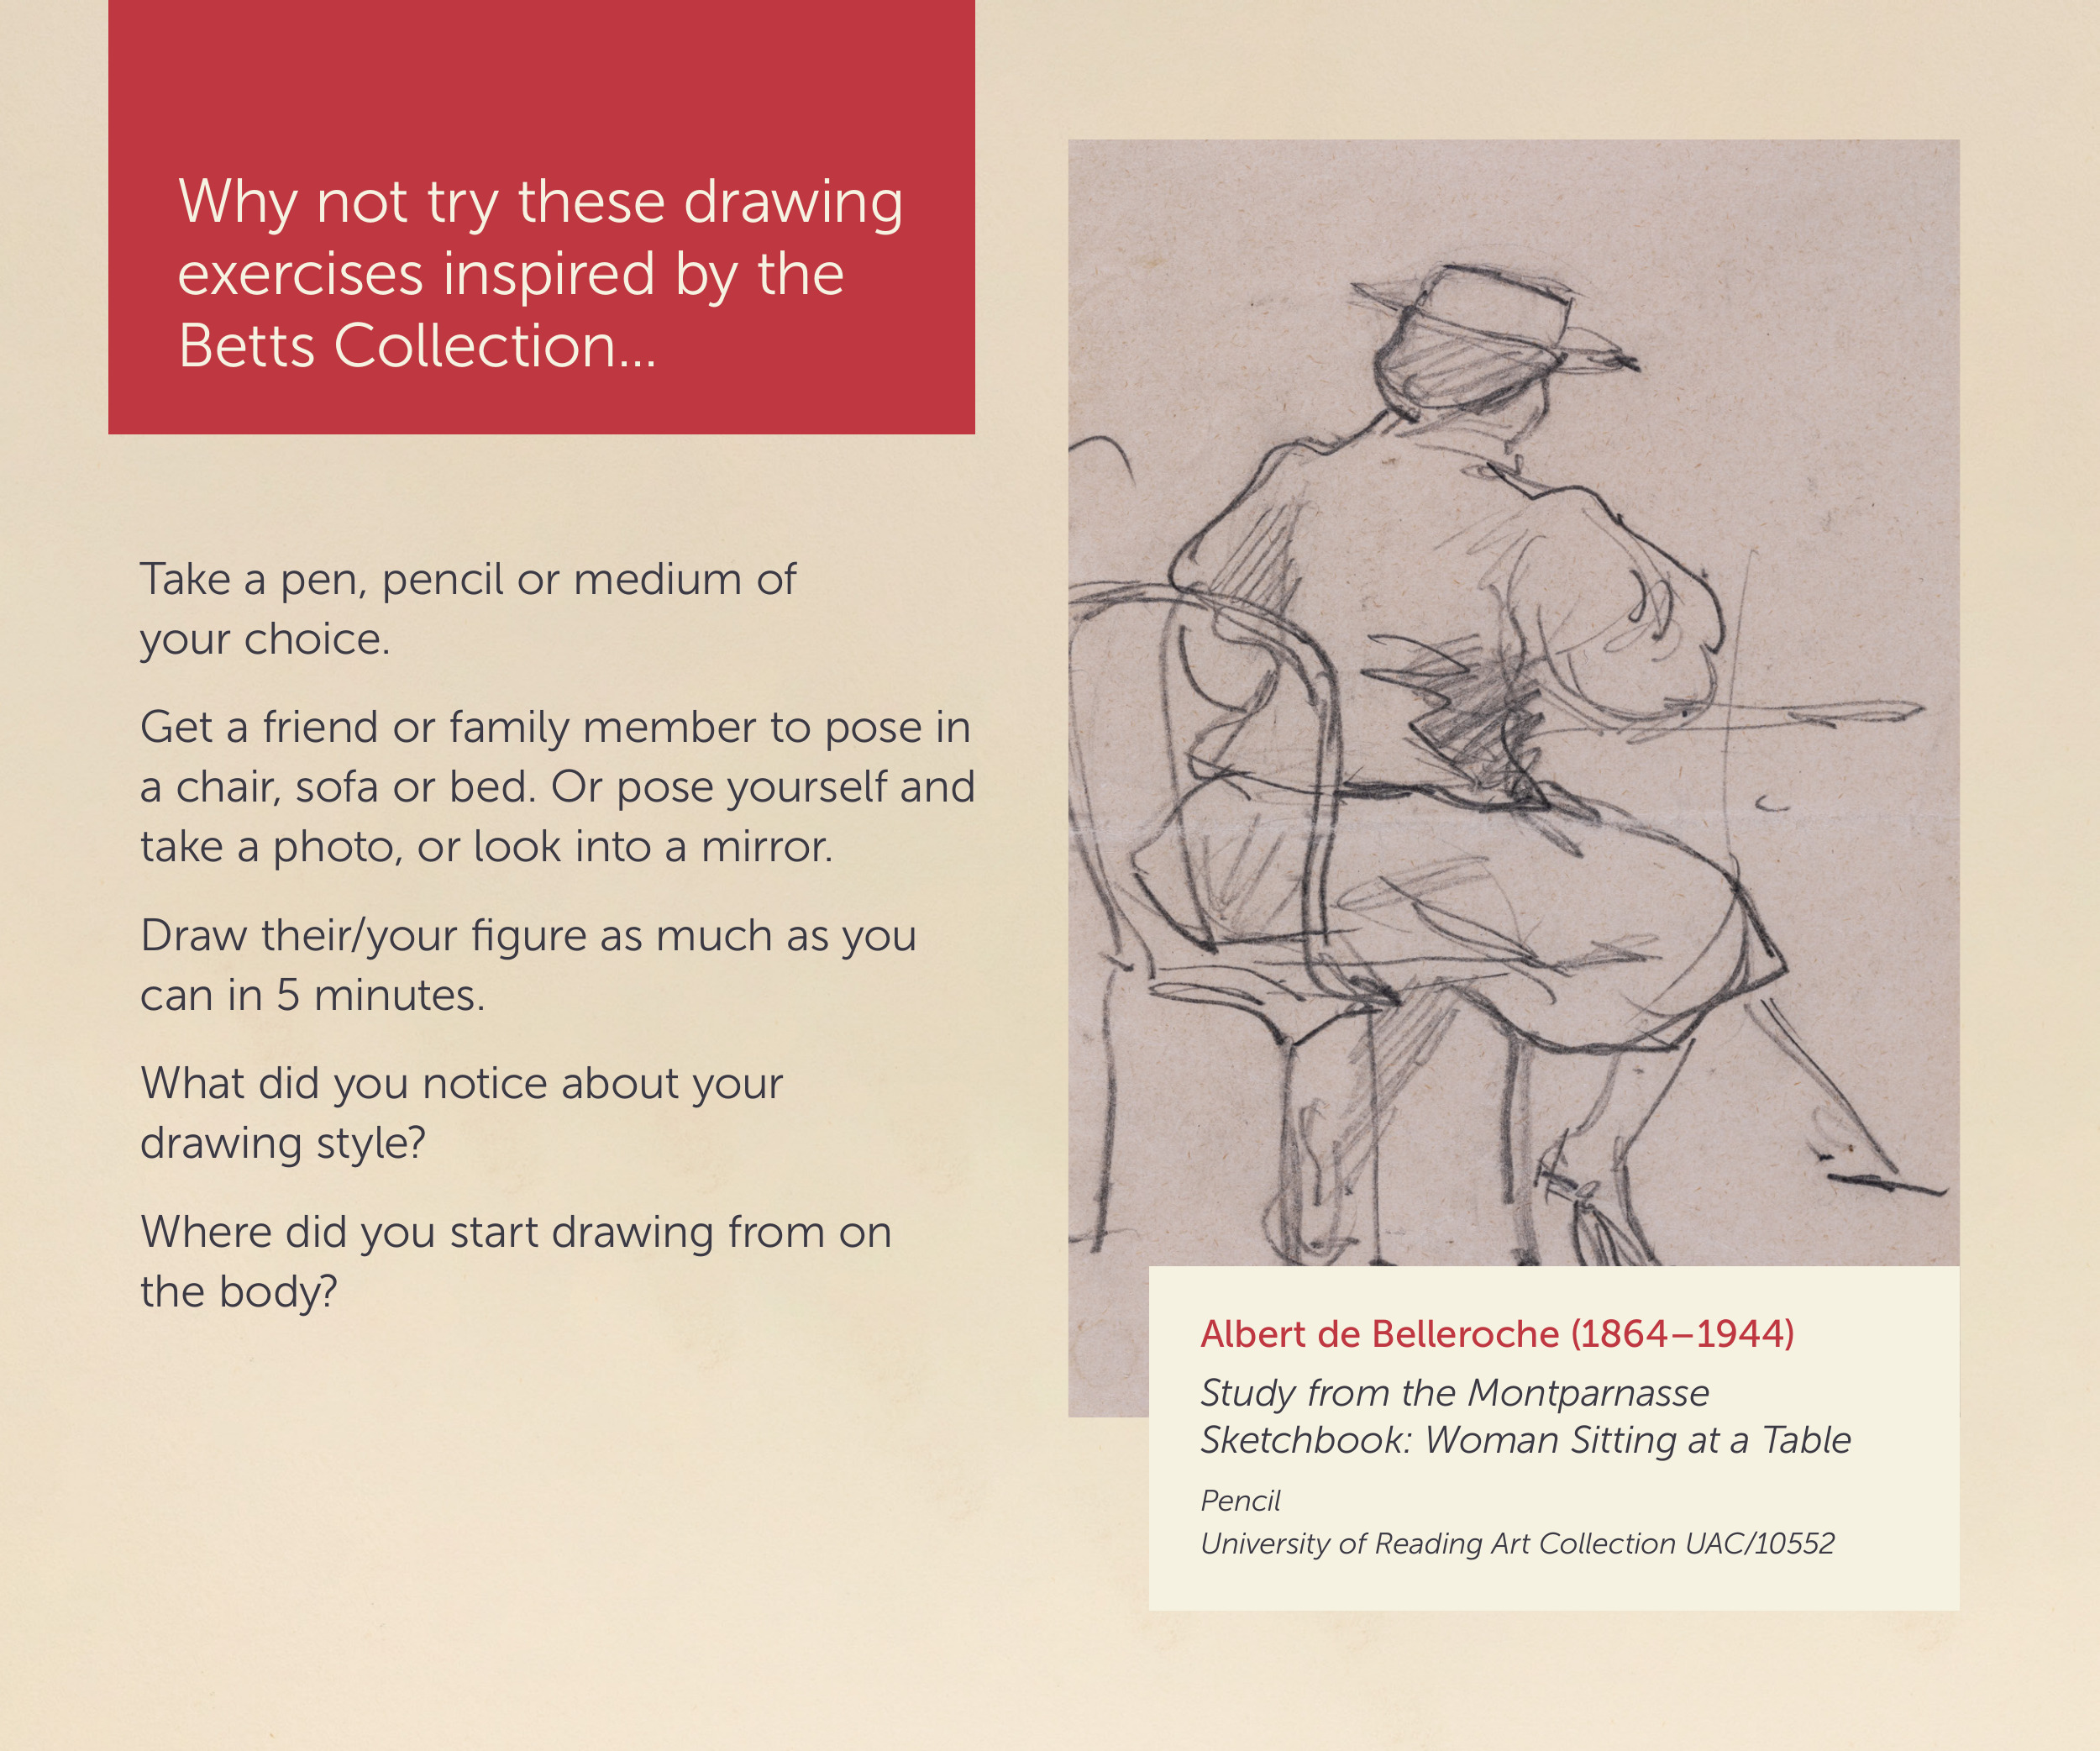 Why not try these drawing exercises inspired by the Betts Collection.. Take a pen, pencil or medium of your choice. Get a friend or family member to post in a chair, sofa or bed. Or pose yourself and take a photo, or look into a mirror. Draw their/your figure as much as you can in 5 minutes. What di you notice about your drawing style? Where did you start drawing from on the body? Image Caption: Albert de Belleroche (1864-1944) Study from the Montparnasse Sketchbook: Woman Sitting at a Table, pencil. University of Reading Art Collection UAC/10552